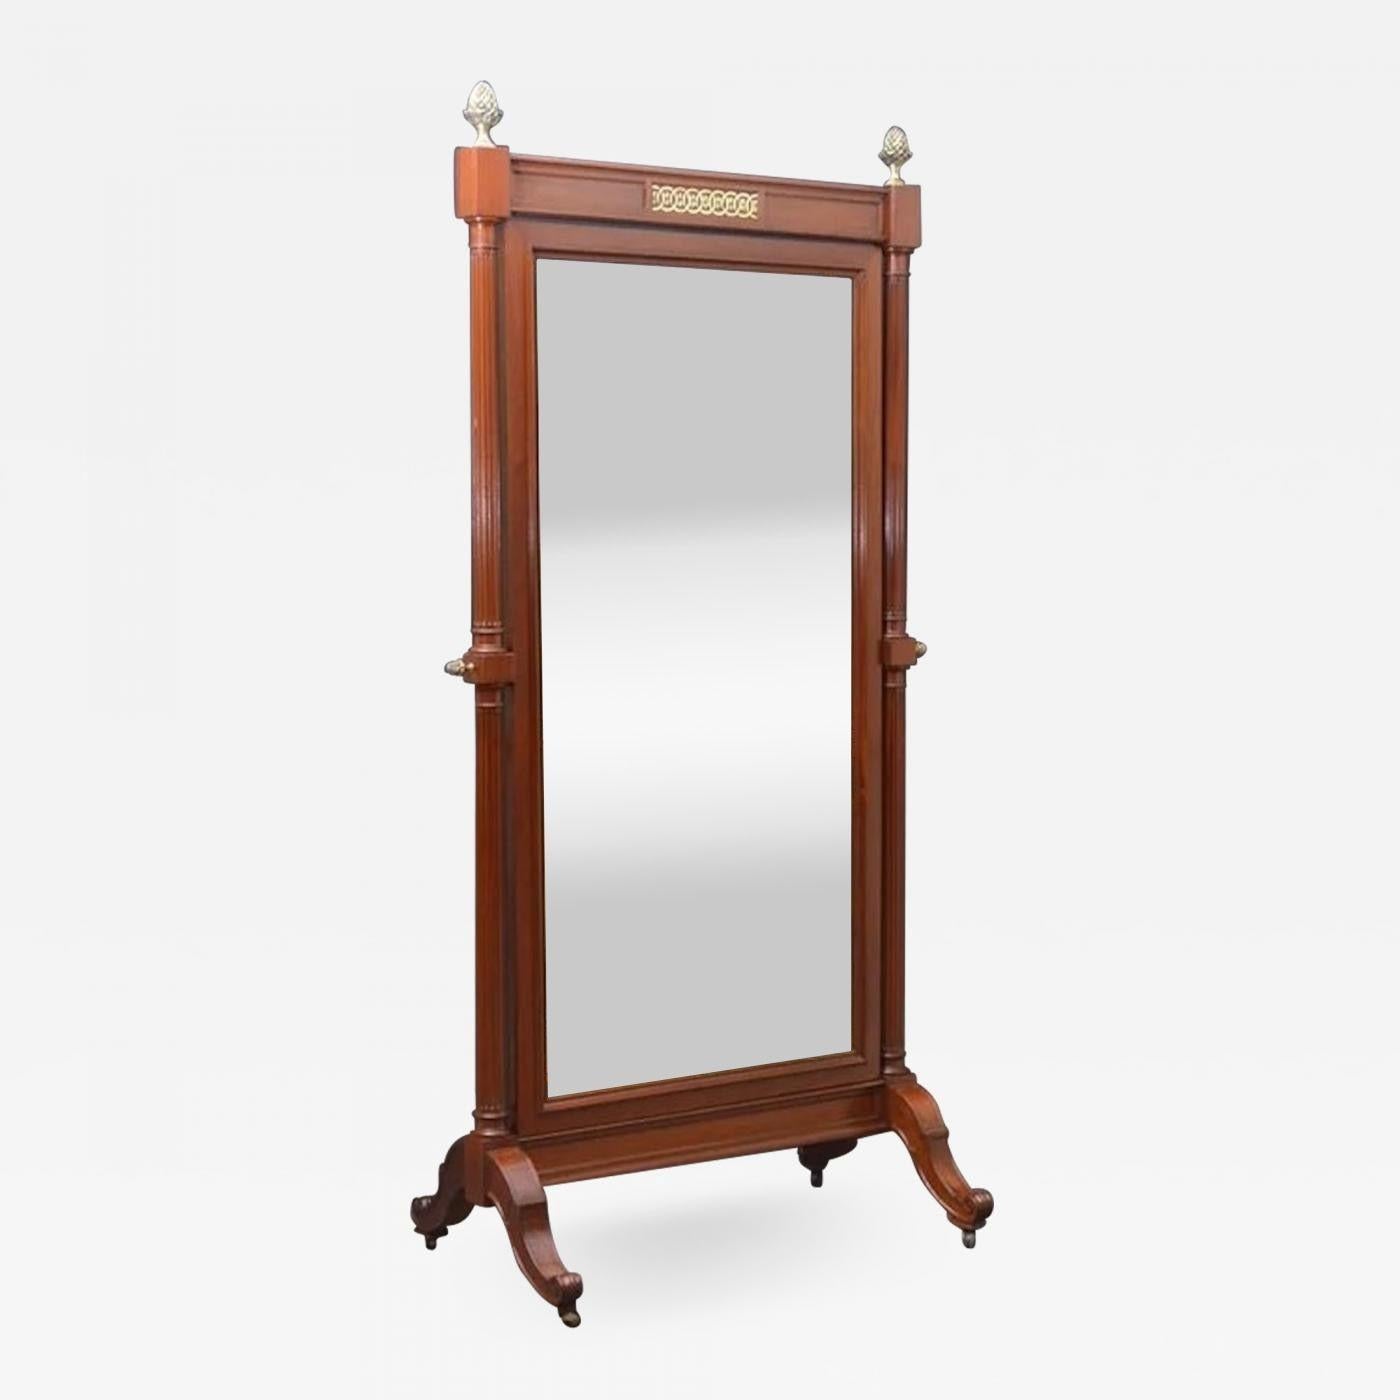 Sn4050 A superb quality solid mahogany French cheval mirror of elegant design, having original mirror plate with some foxing in moulded frame and turned and fluted supports with fantastic quality brass pineapple finials to top united by brass